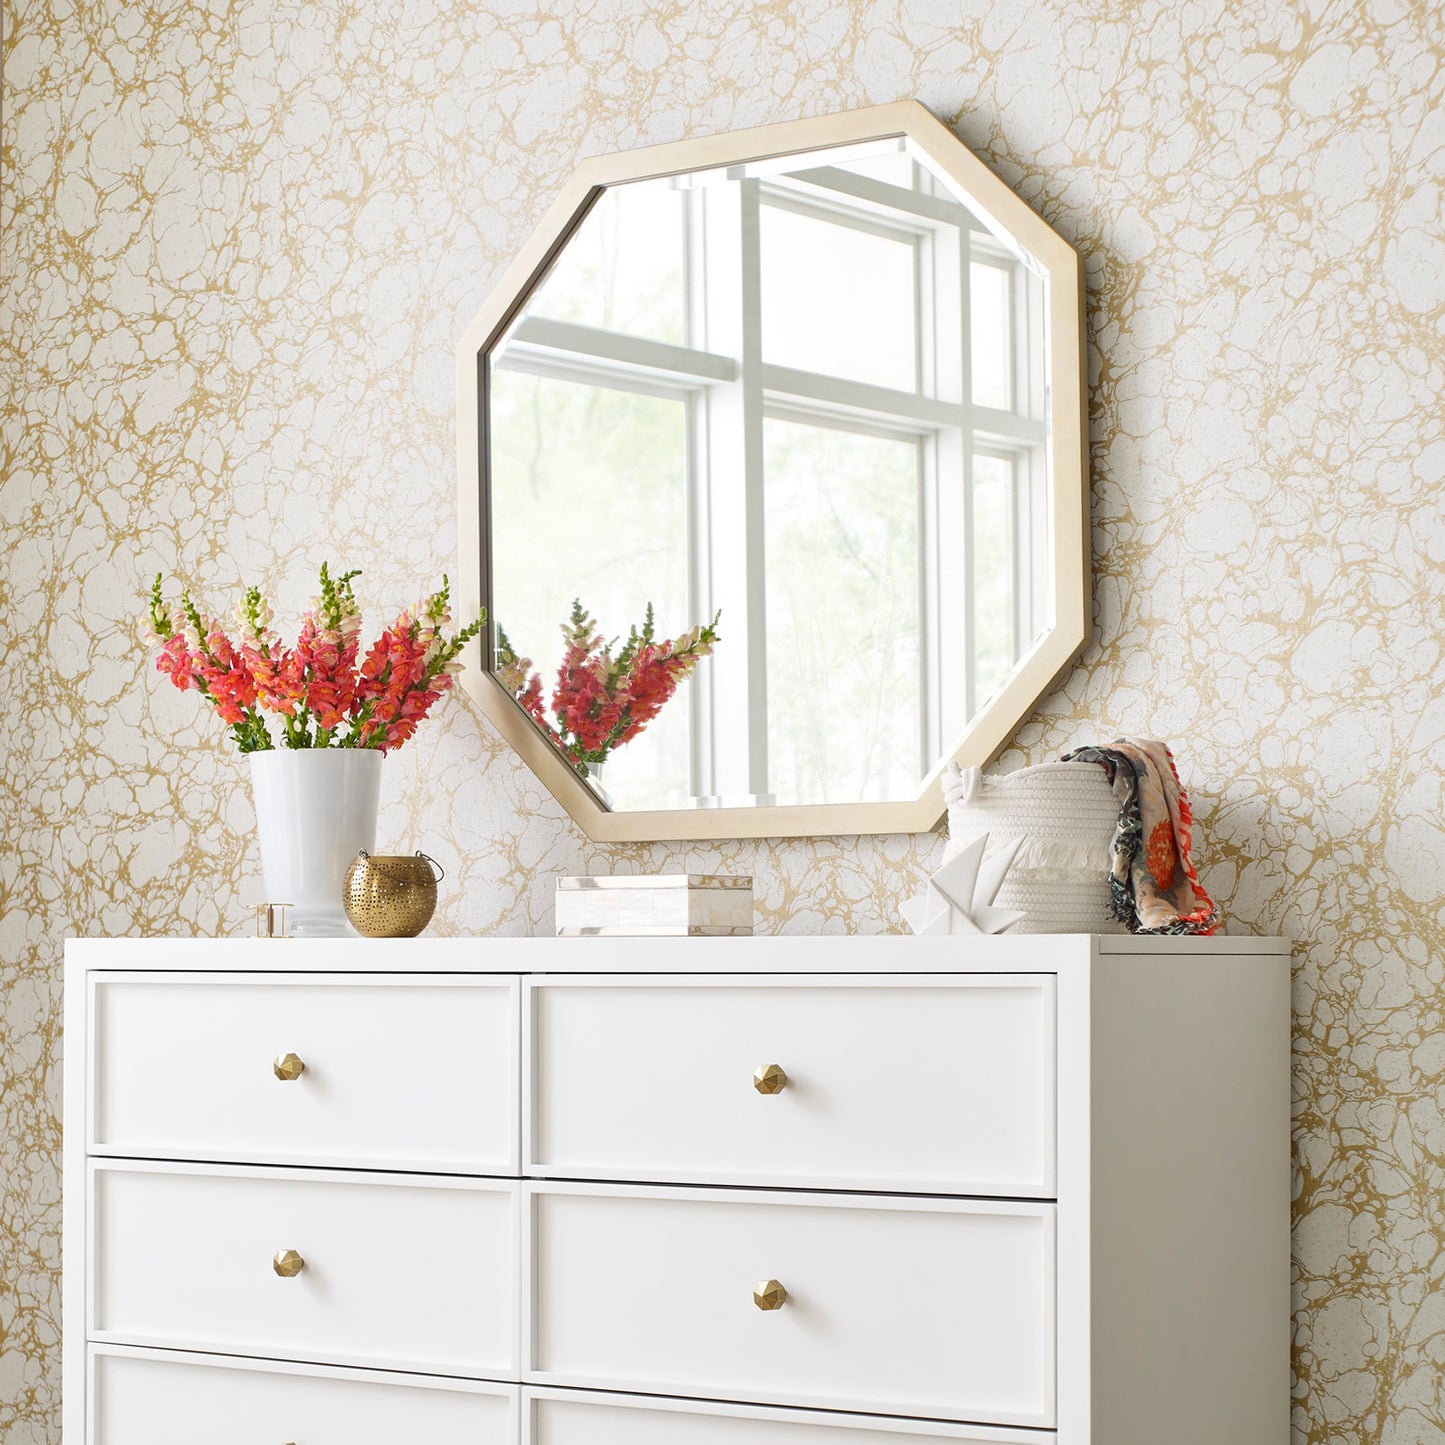 Chelsea by Rachael Ray Mirror - Gold